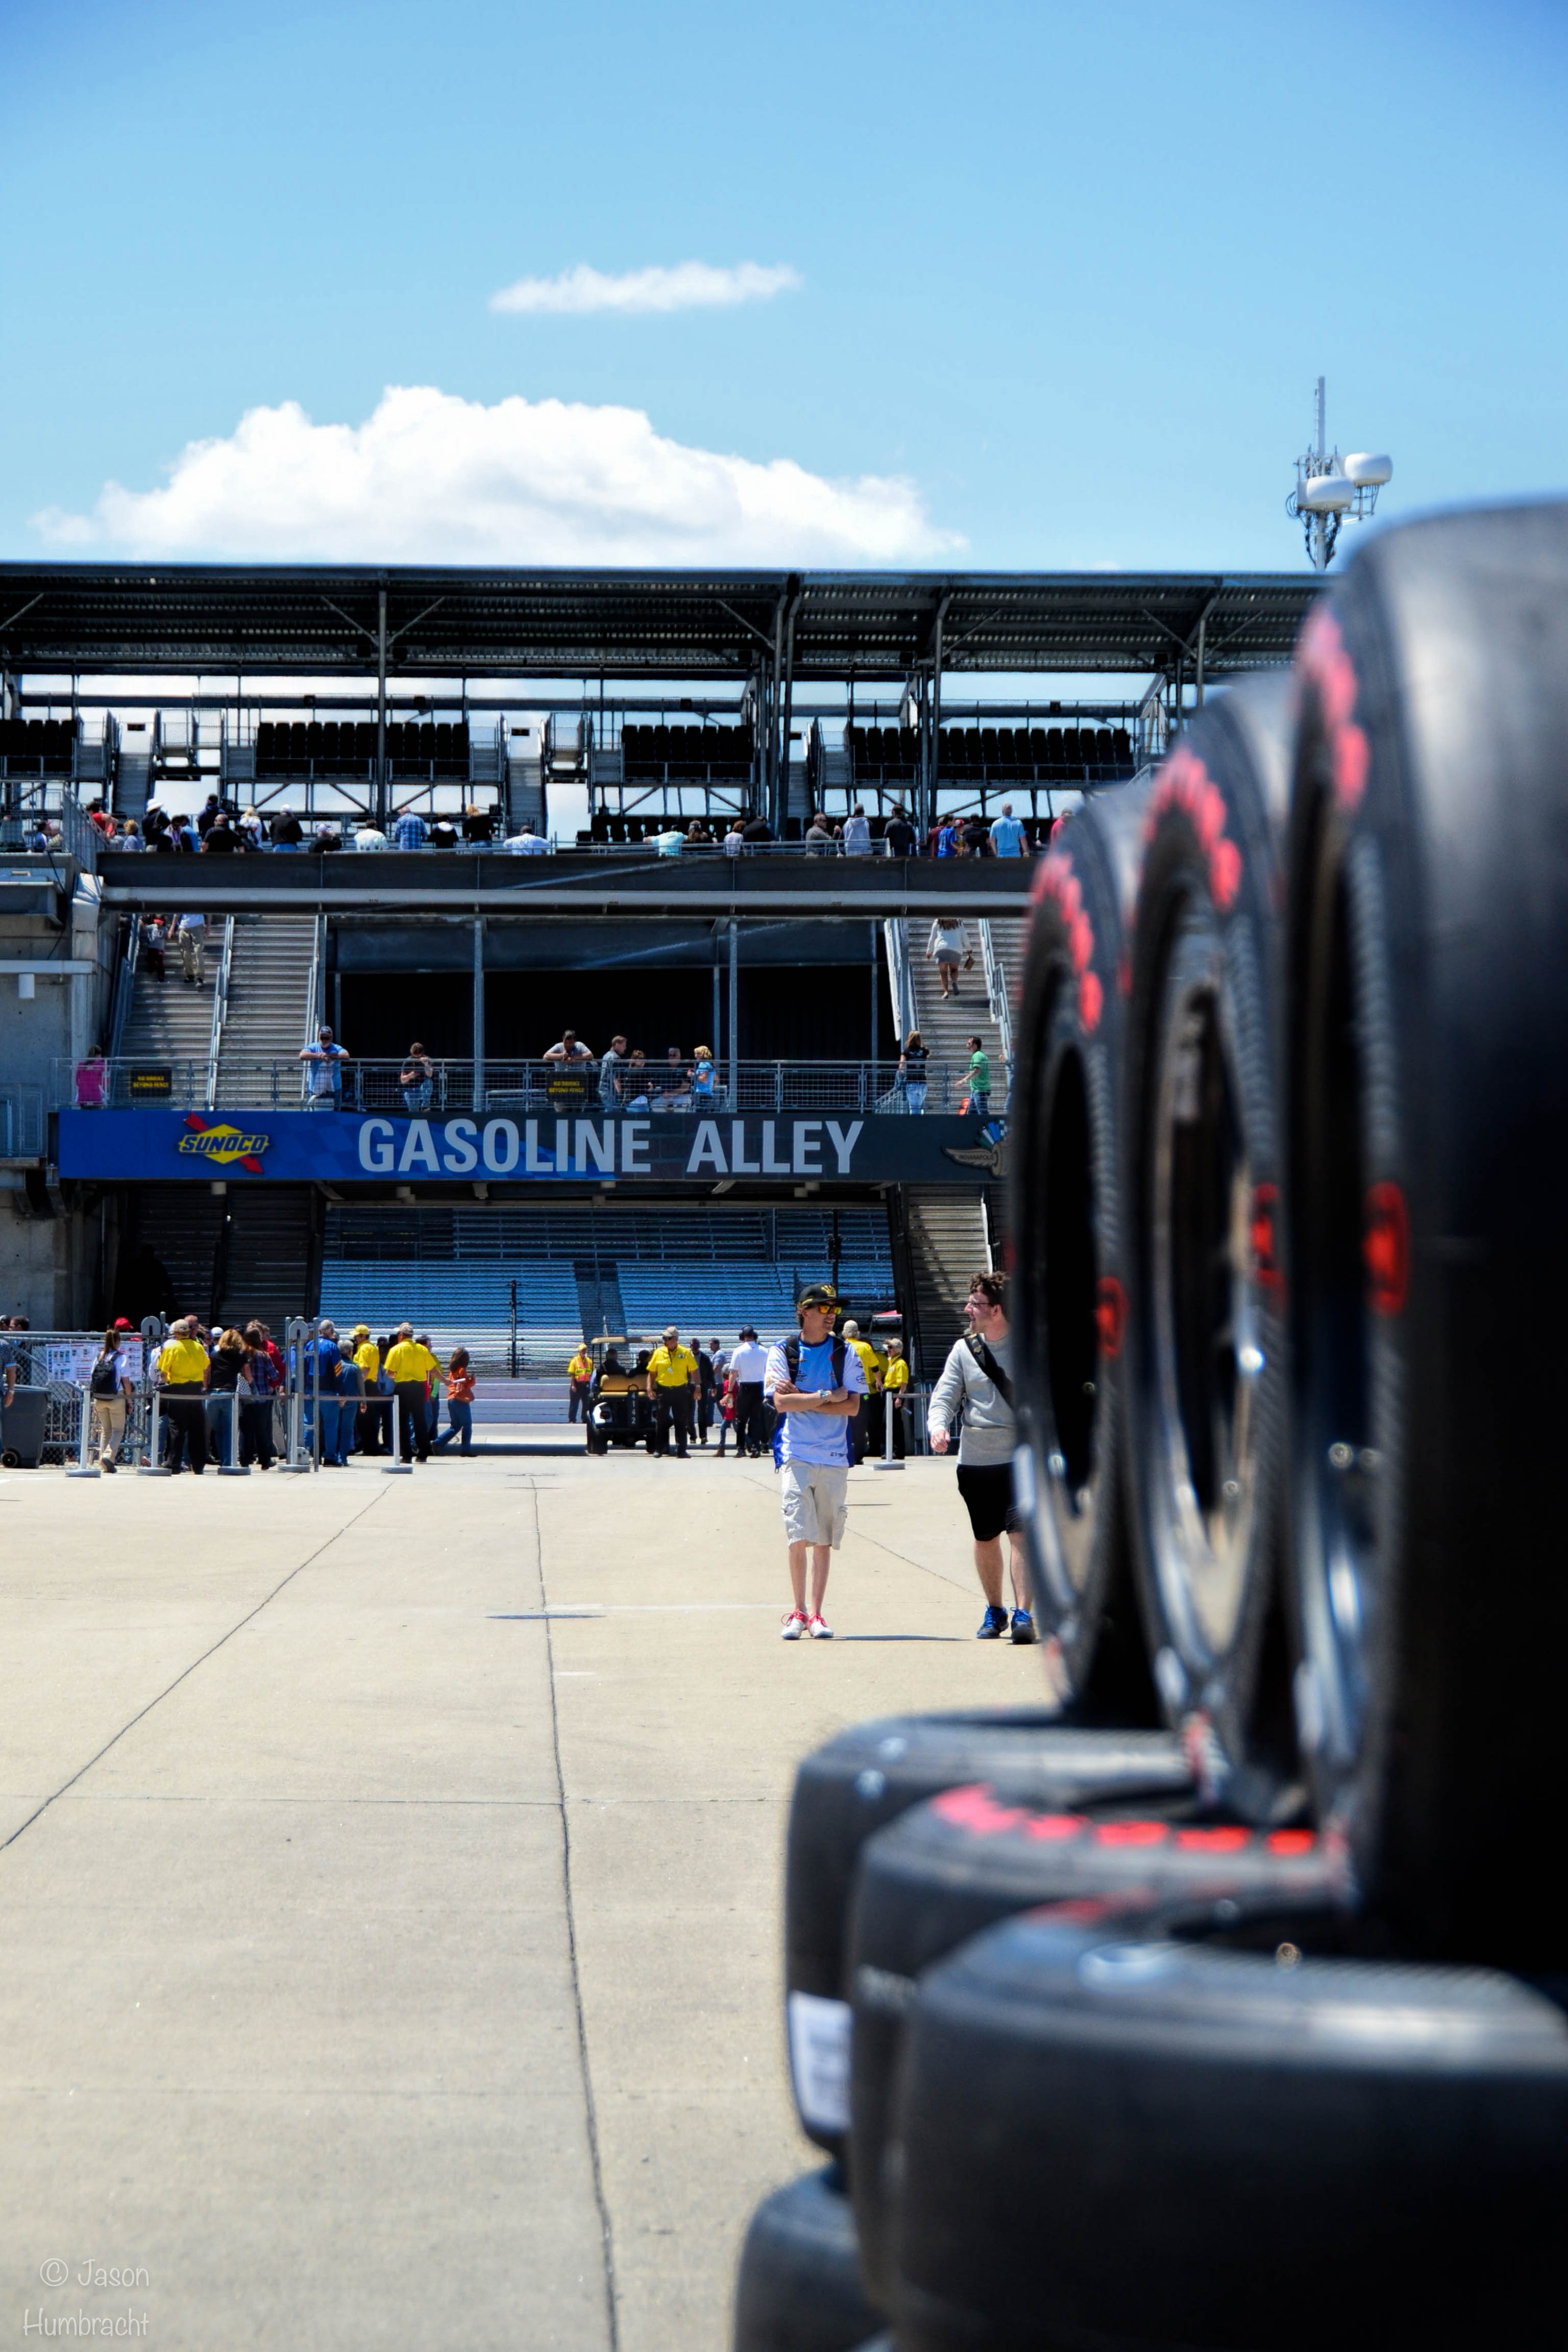 Indianapolis 500 100th Running Practice Day | Indianapolis Motor Speedway | Image By Indiana Architectural Photographer Jason Humbracht